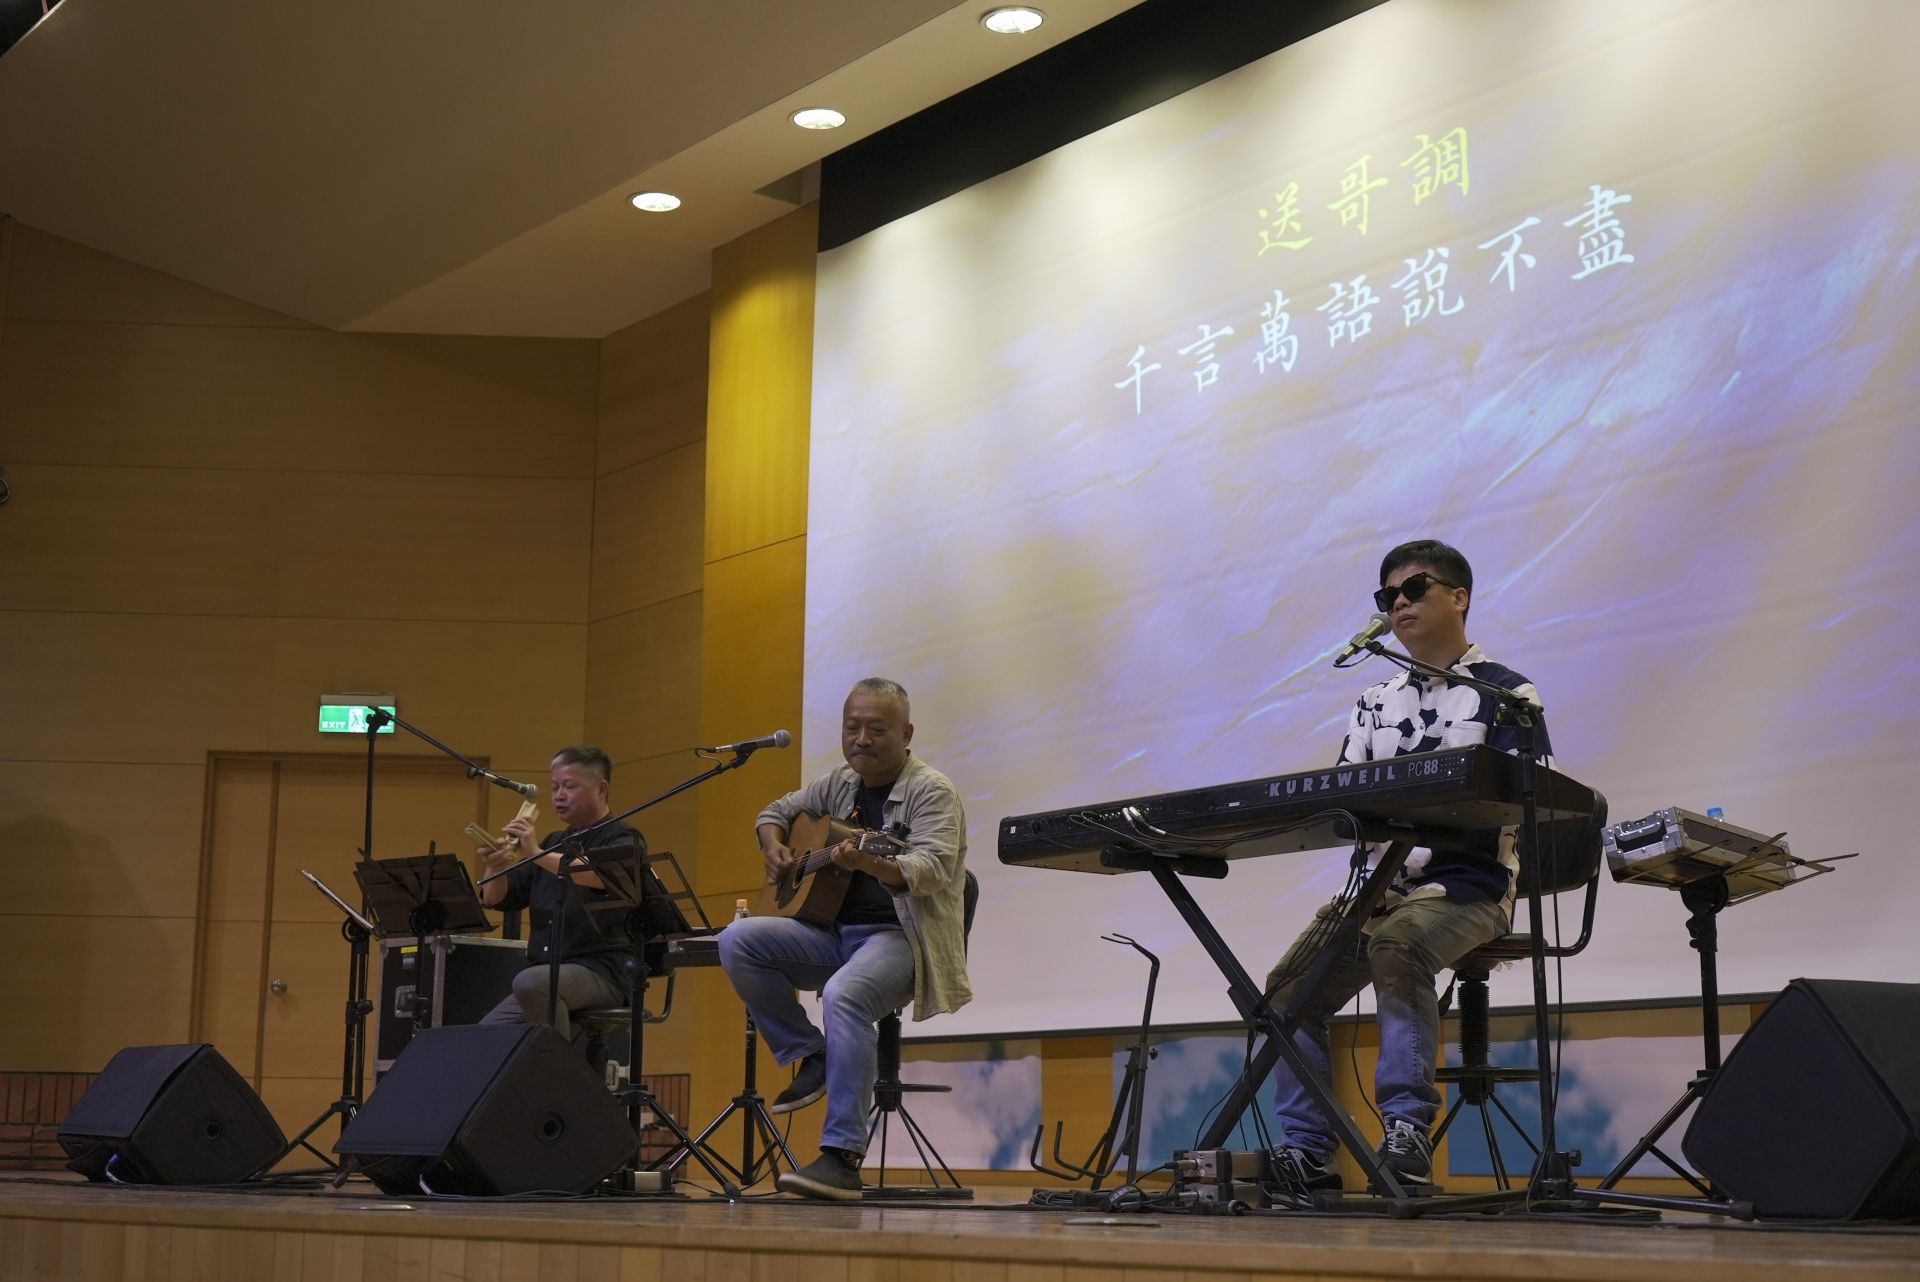 The King of Golden Melody appears at NCKU's Campus Book Fair, sharing Taiwanese ballads to unveil Taiwan's historical context.